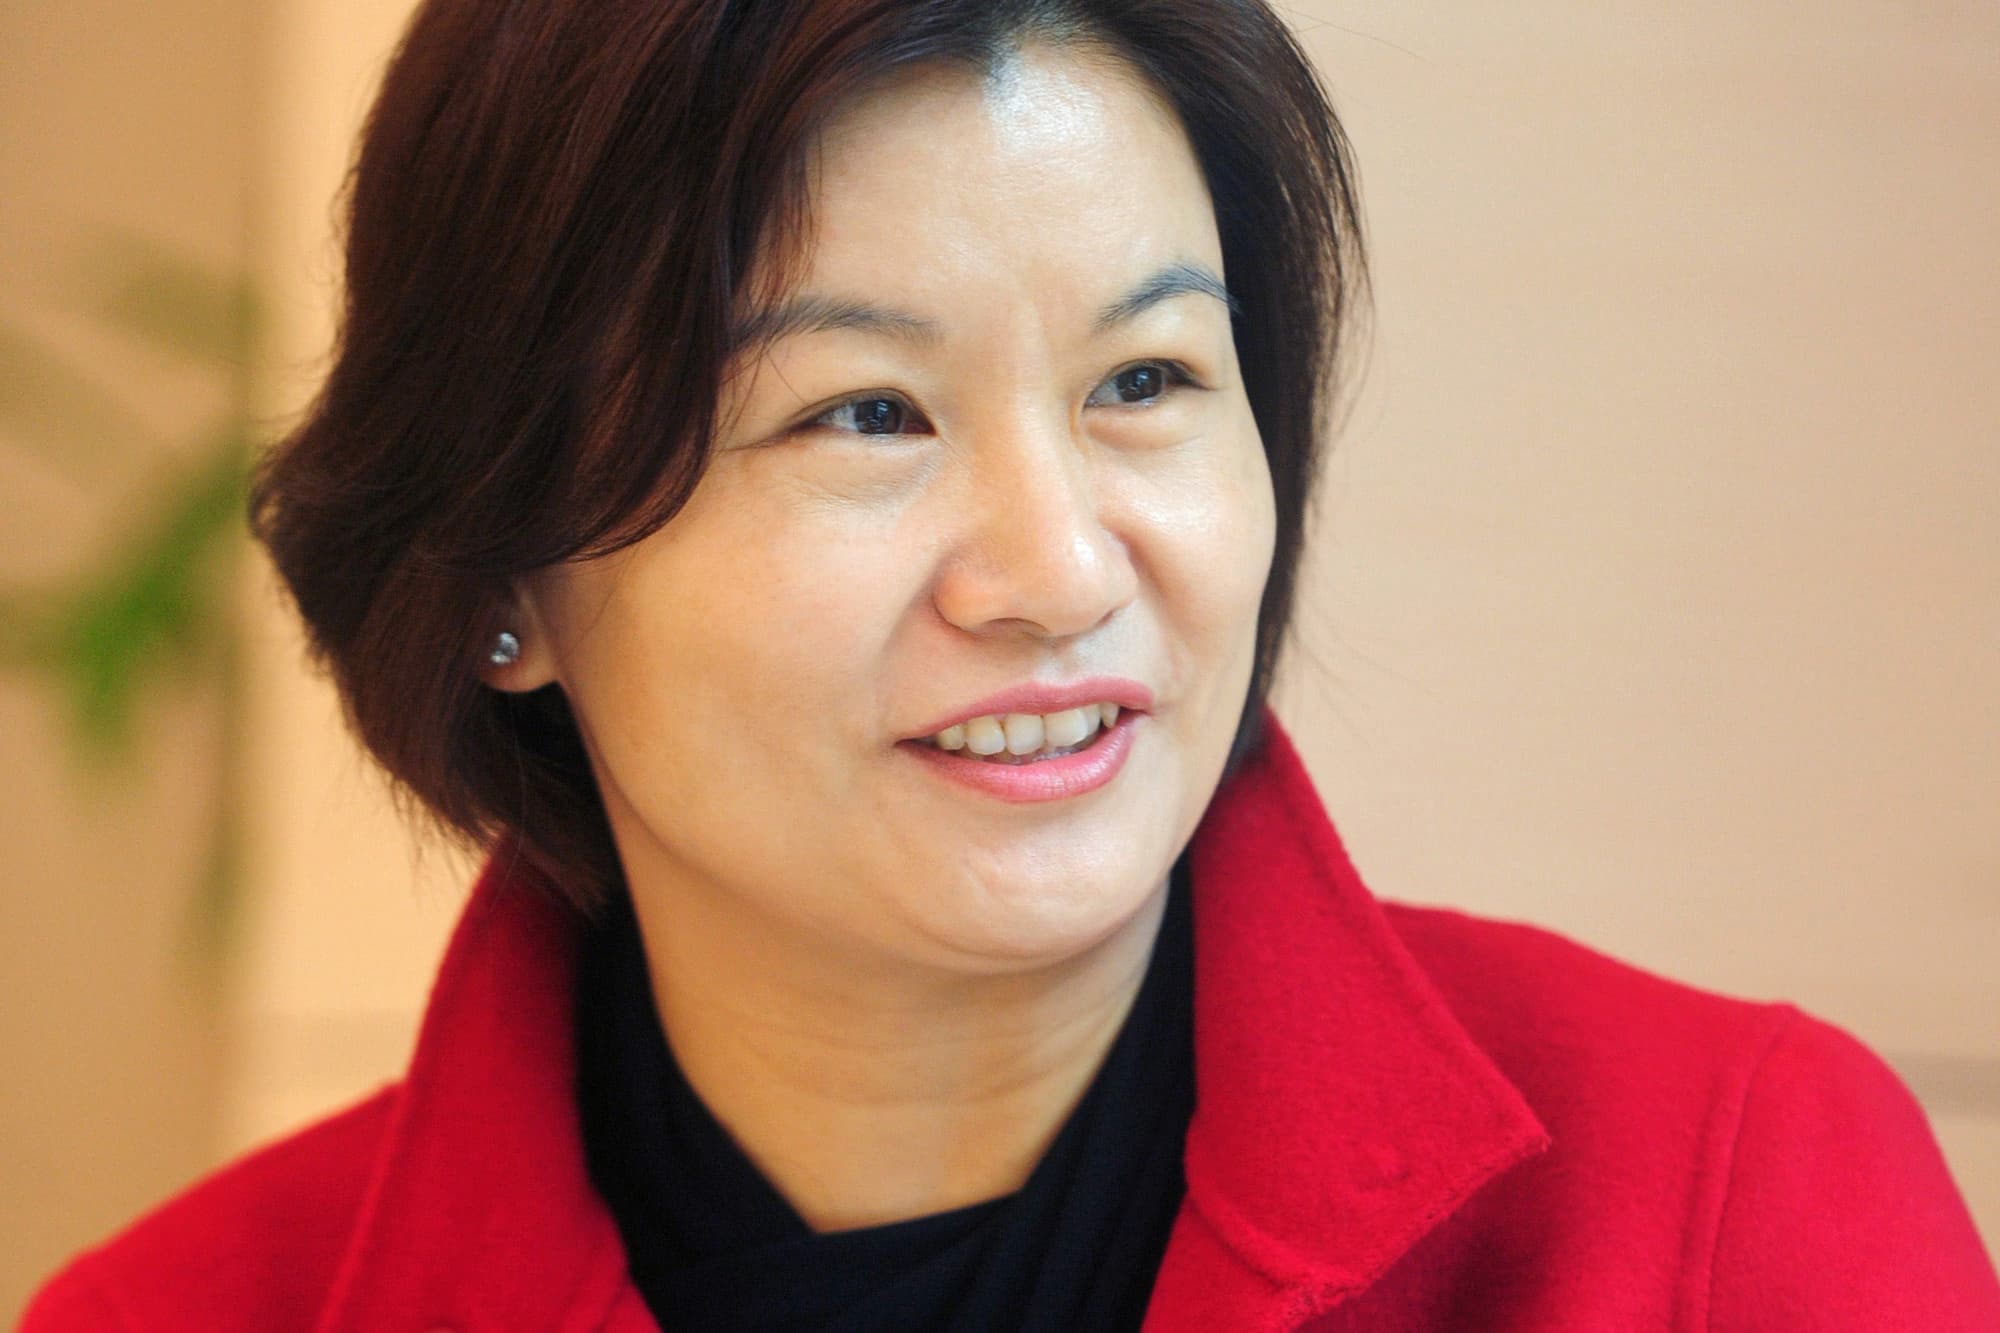 Asian woman world richest in the List of